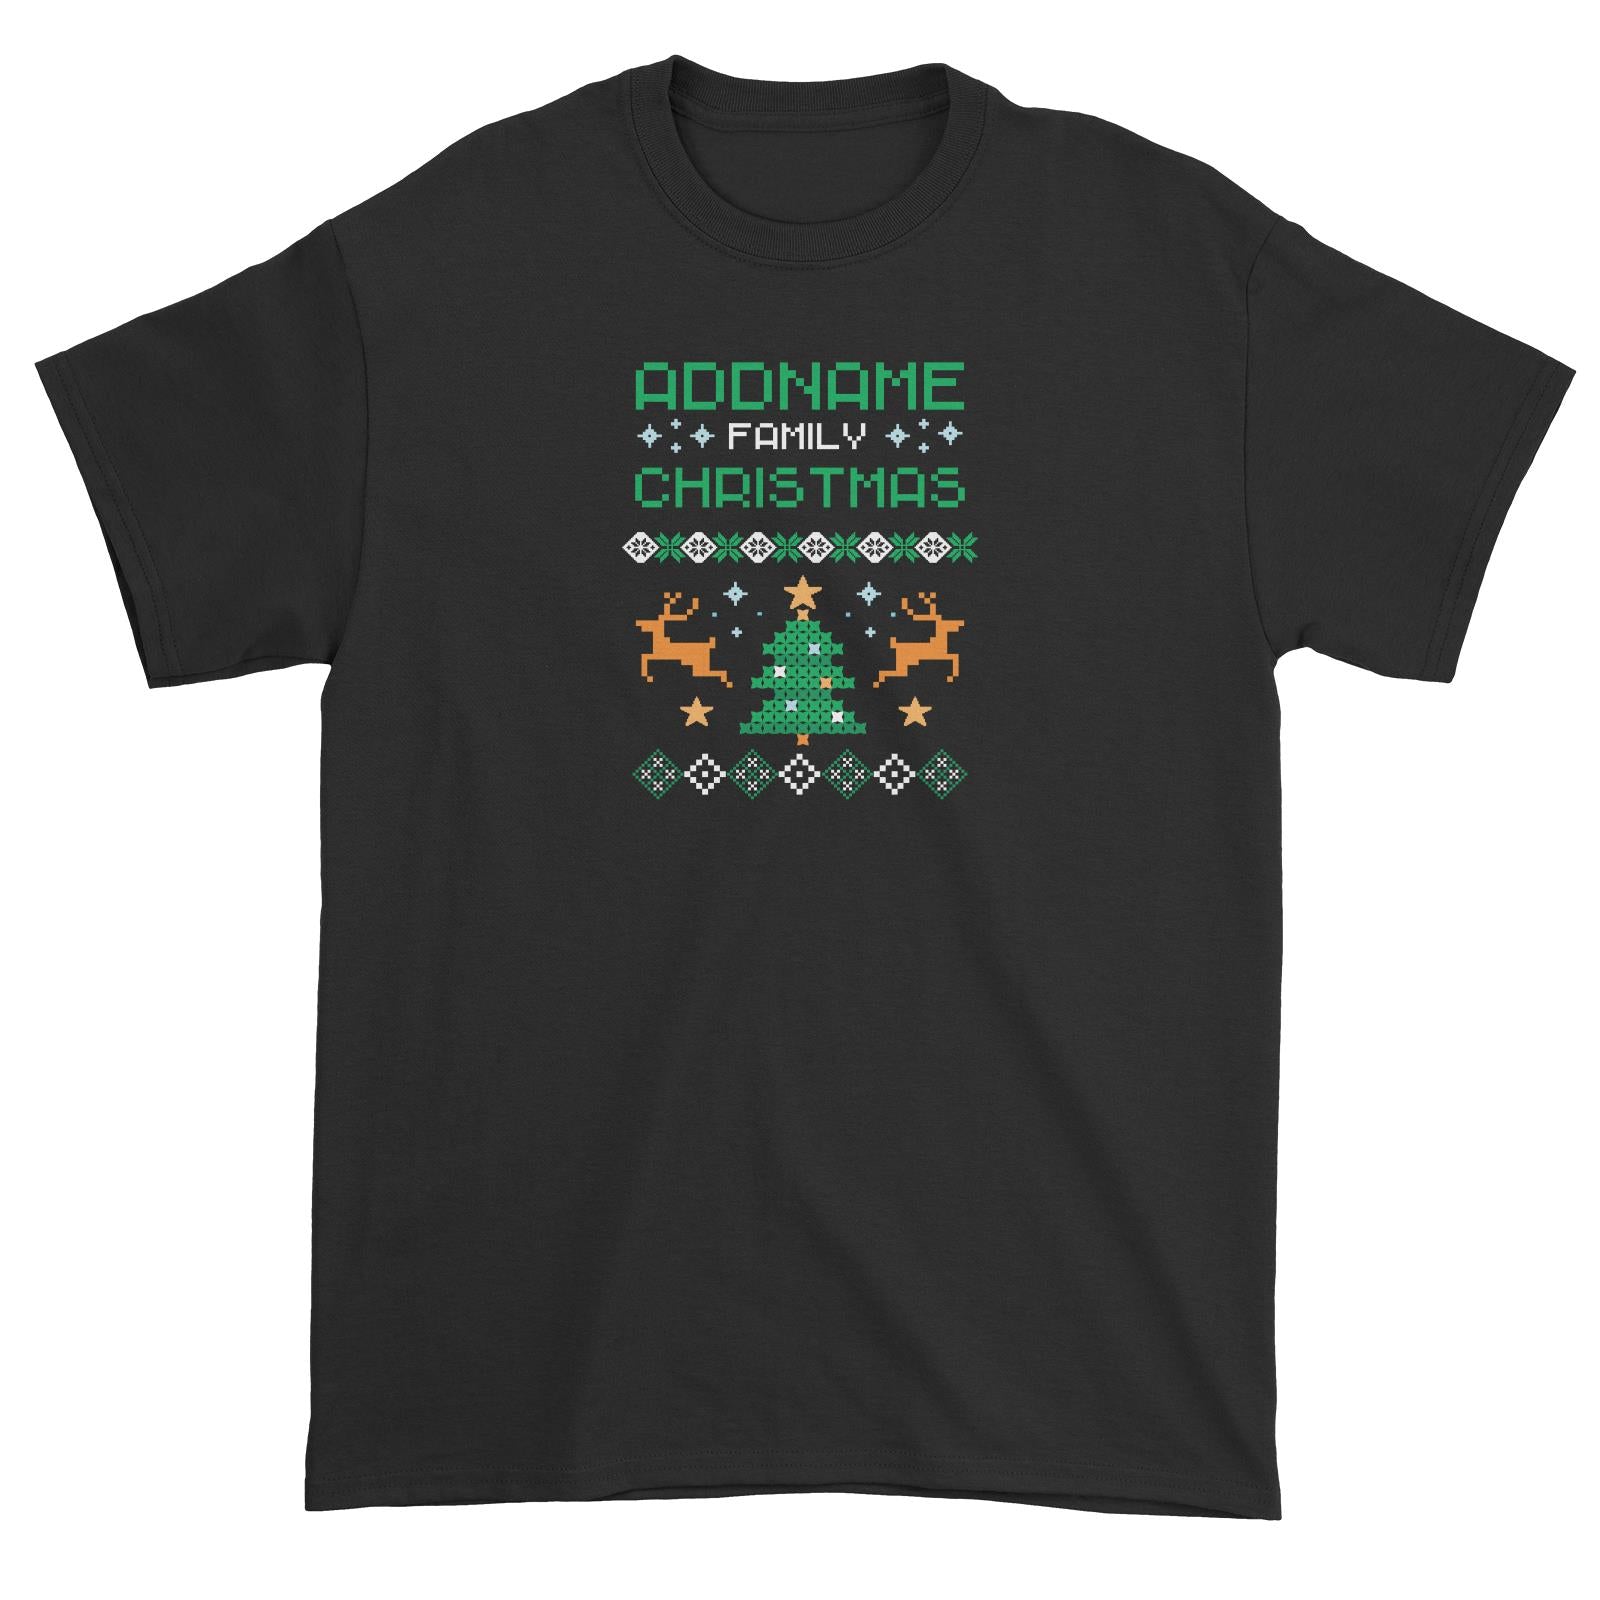 Christmas Series Addname Family Sweater Design Unisex T-Shirt